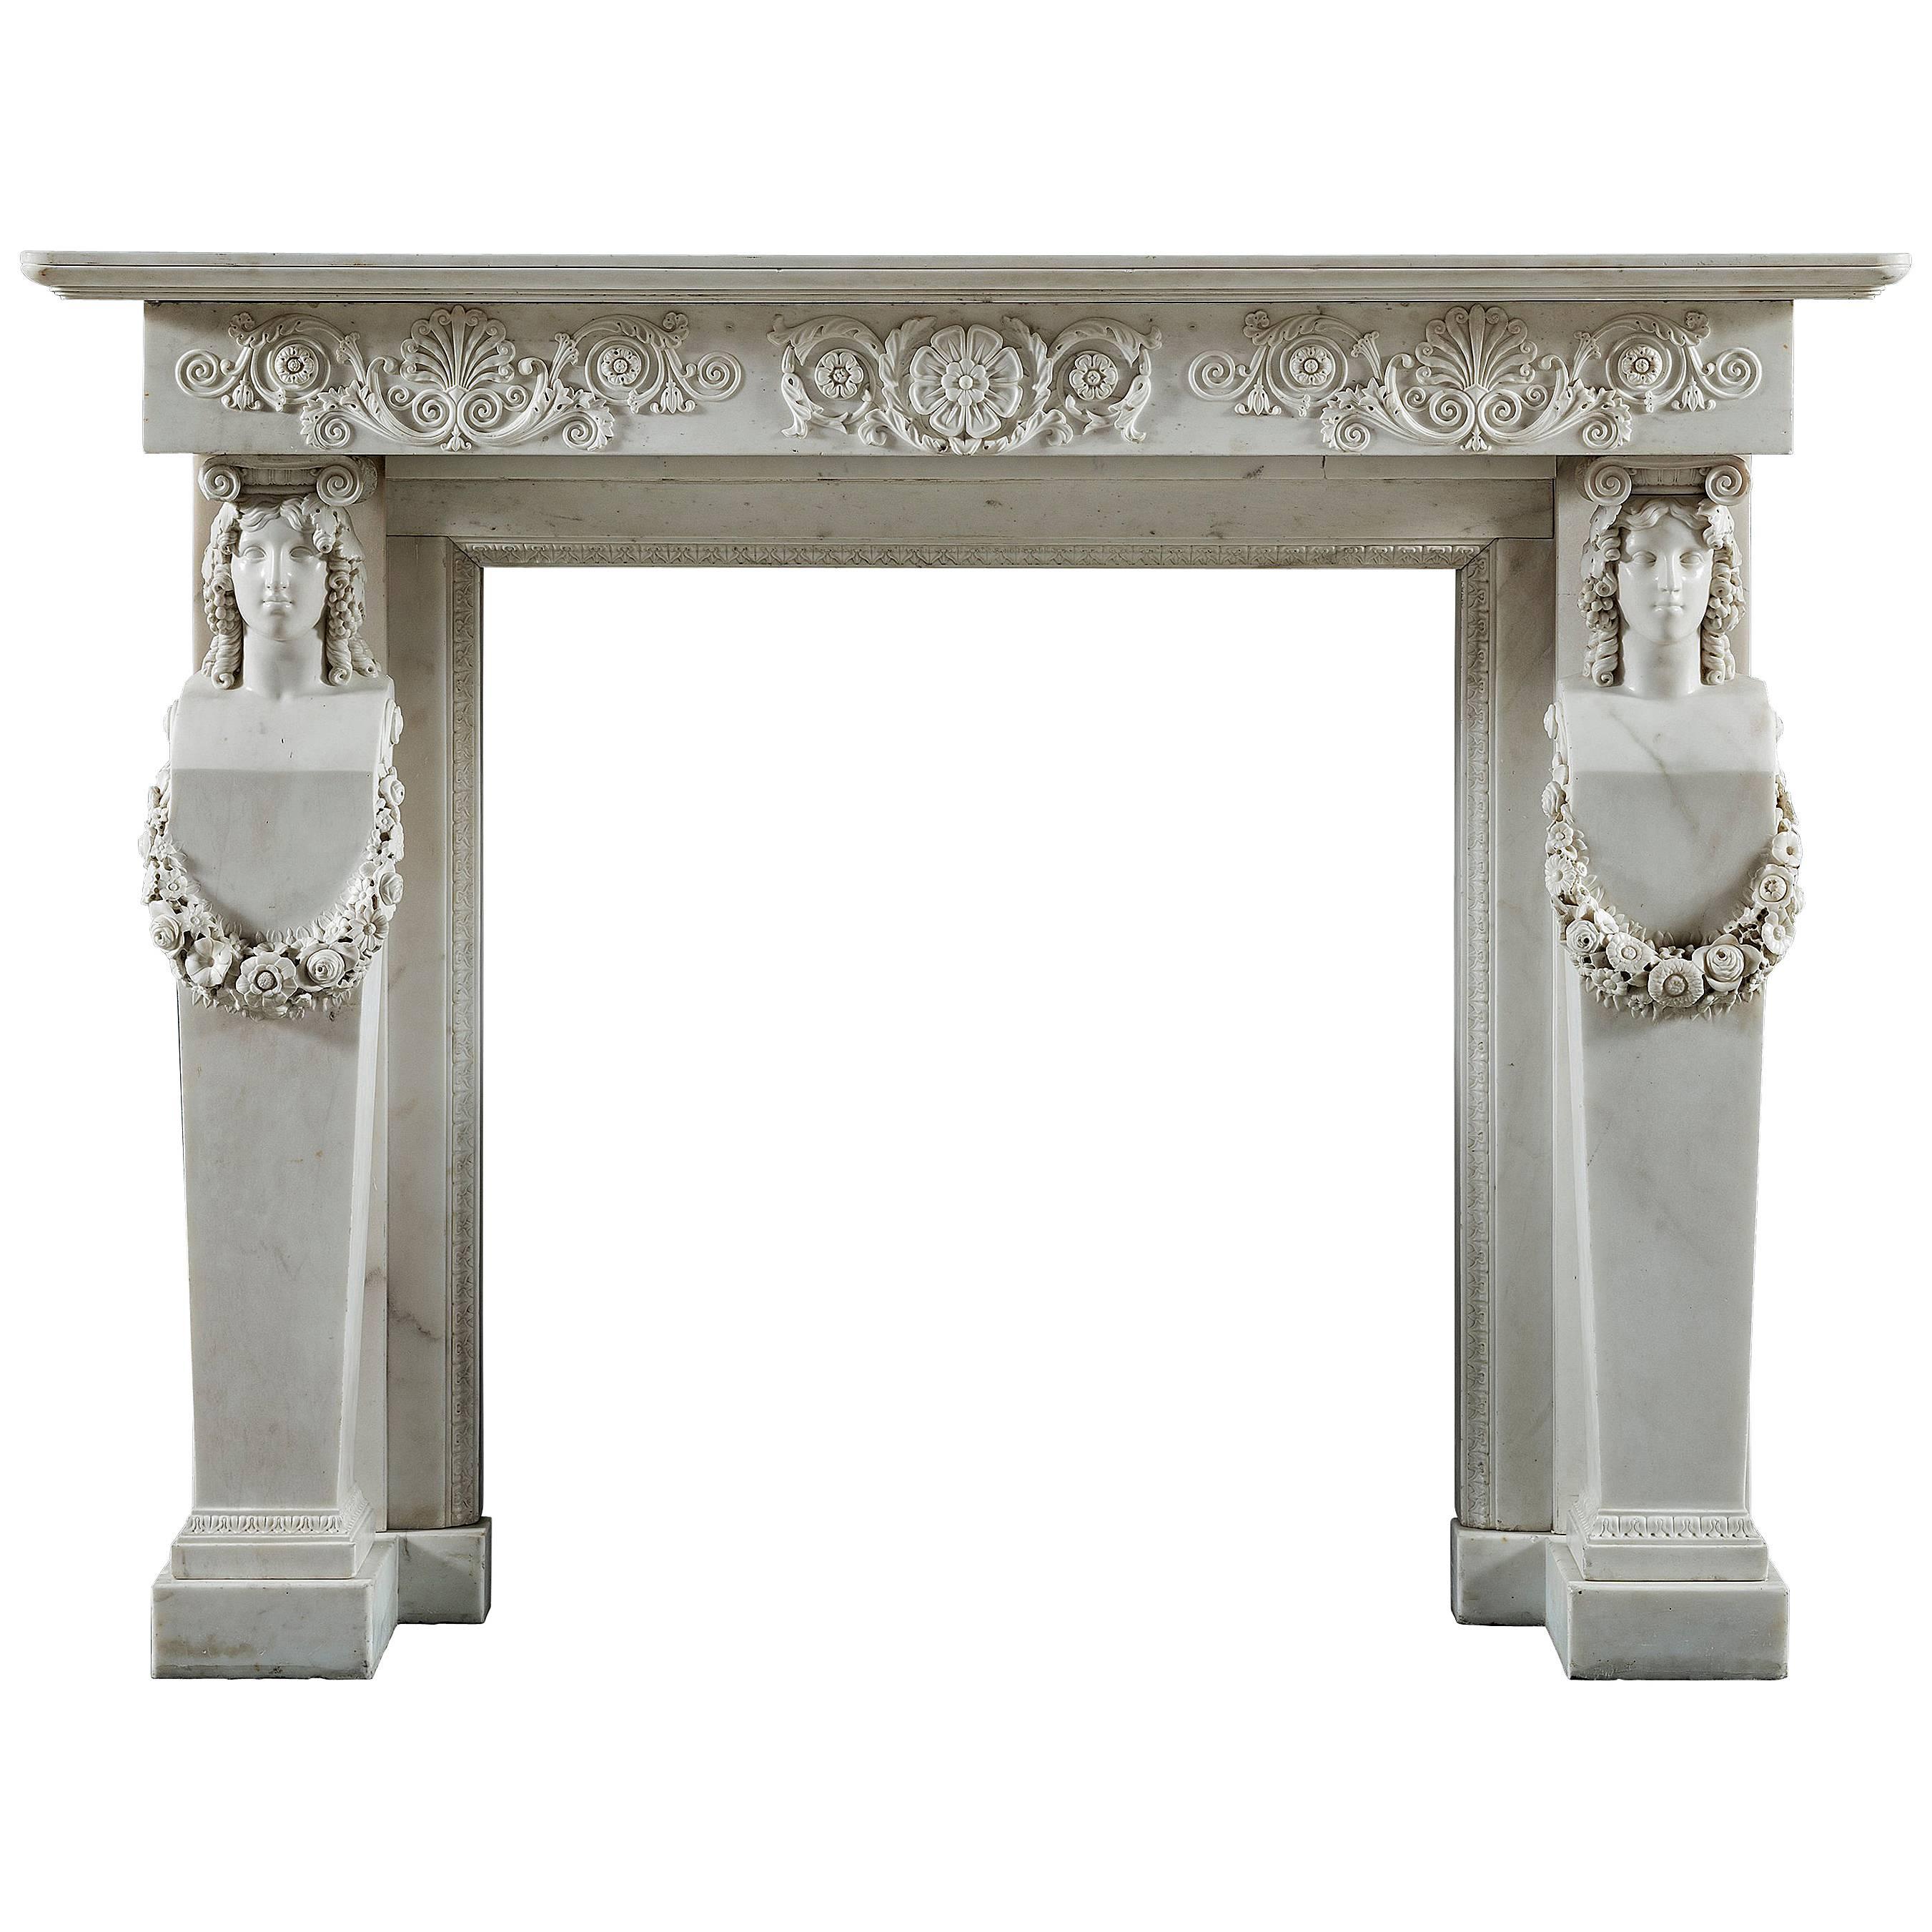 Antique Regency Grecian Revival Fireplace Mantel with Cartyatid / Term Legs For Sale